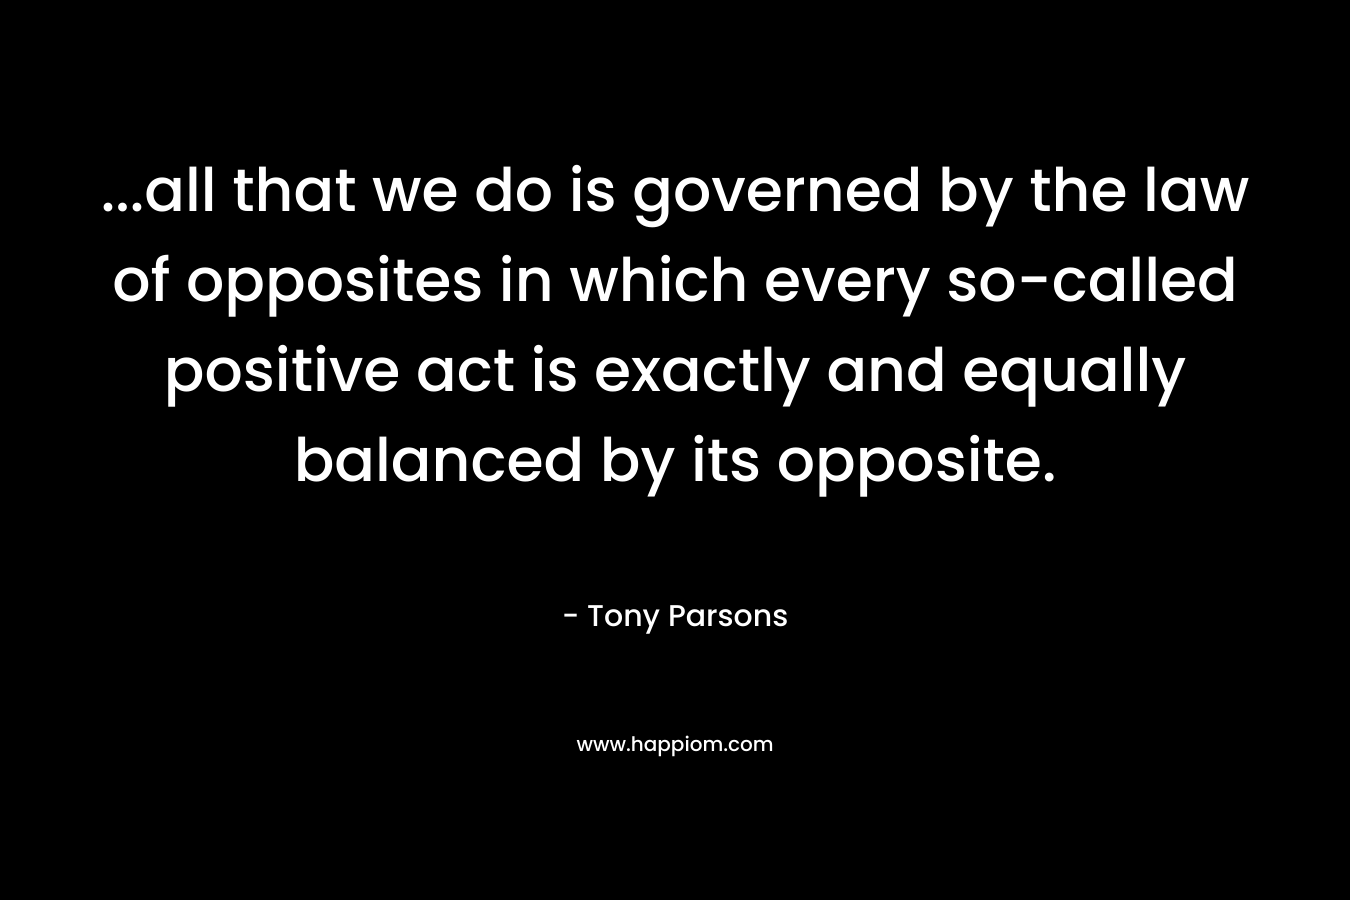 …all that we do is governed by the law of opposites in which every so-called positive act is exactly and equally balanced by its opposite. – Tony Parsons